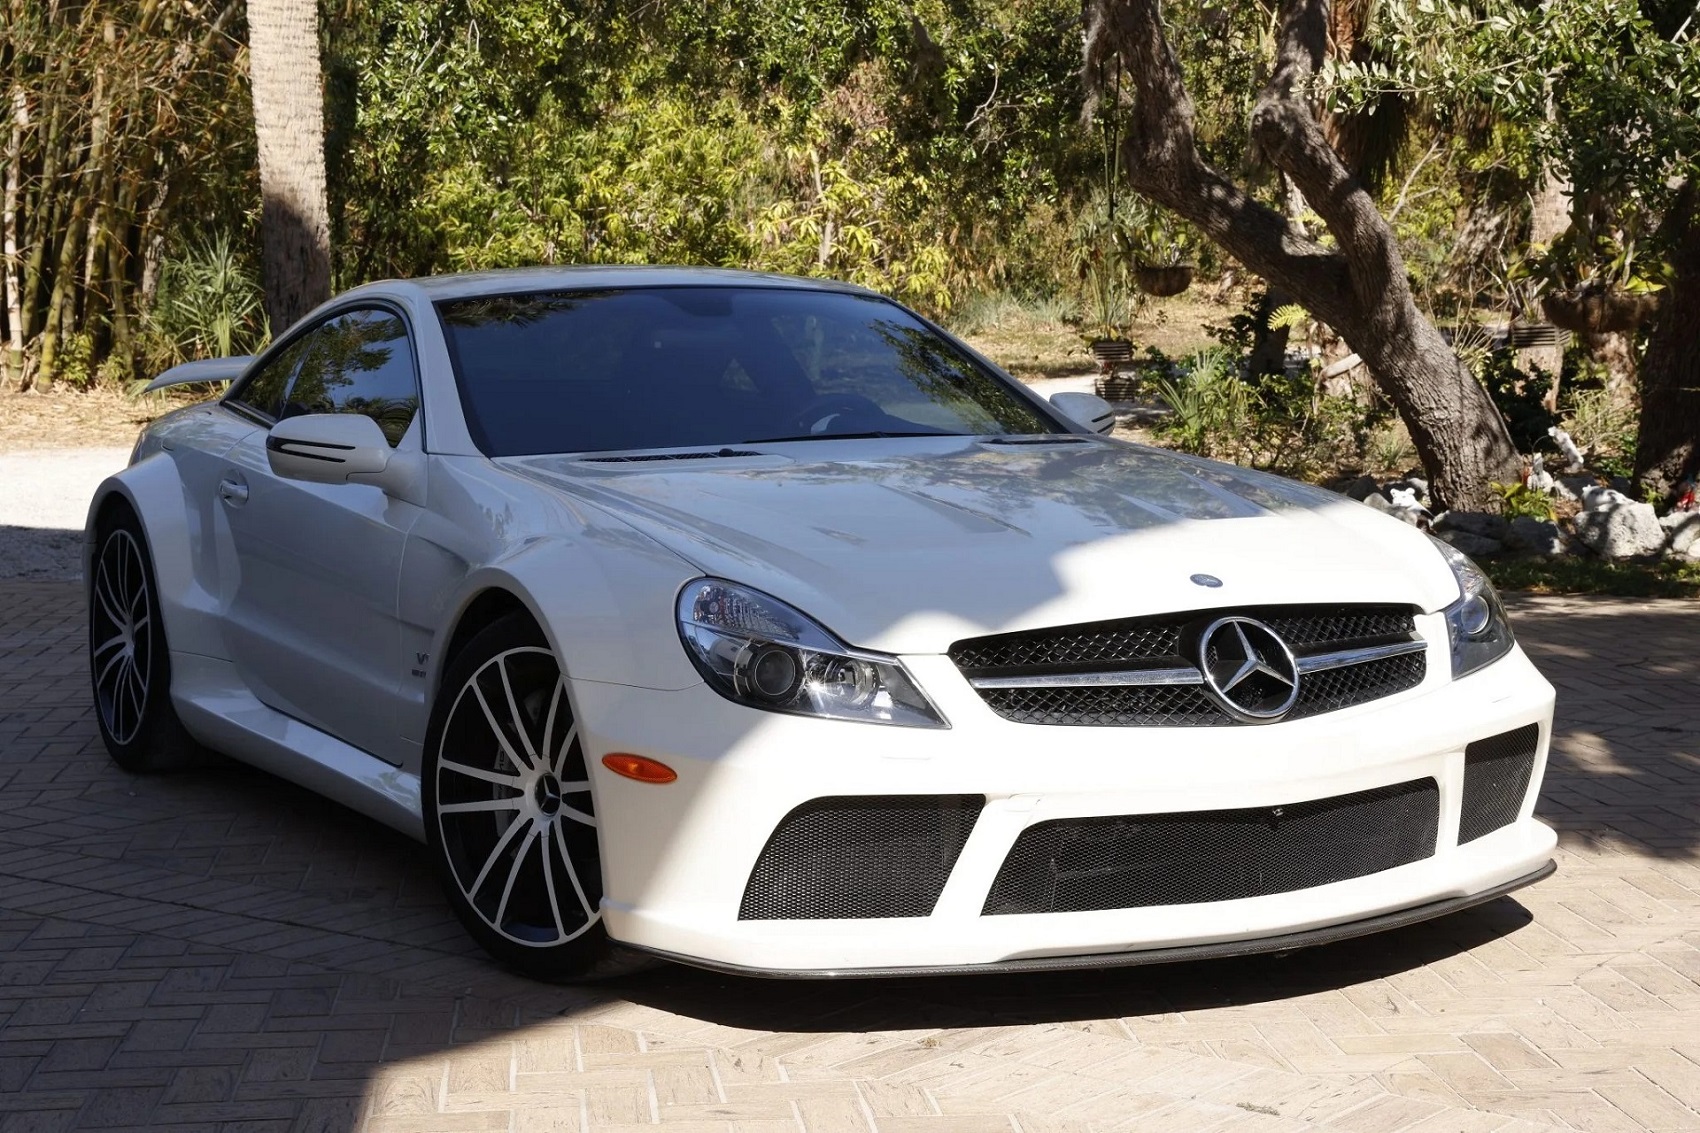 front-angled-view of a white 2009 mercedes benz sl65 amg black series